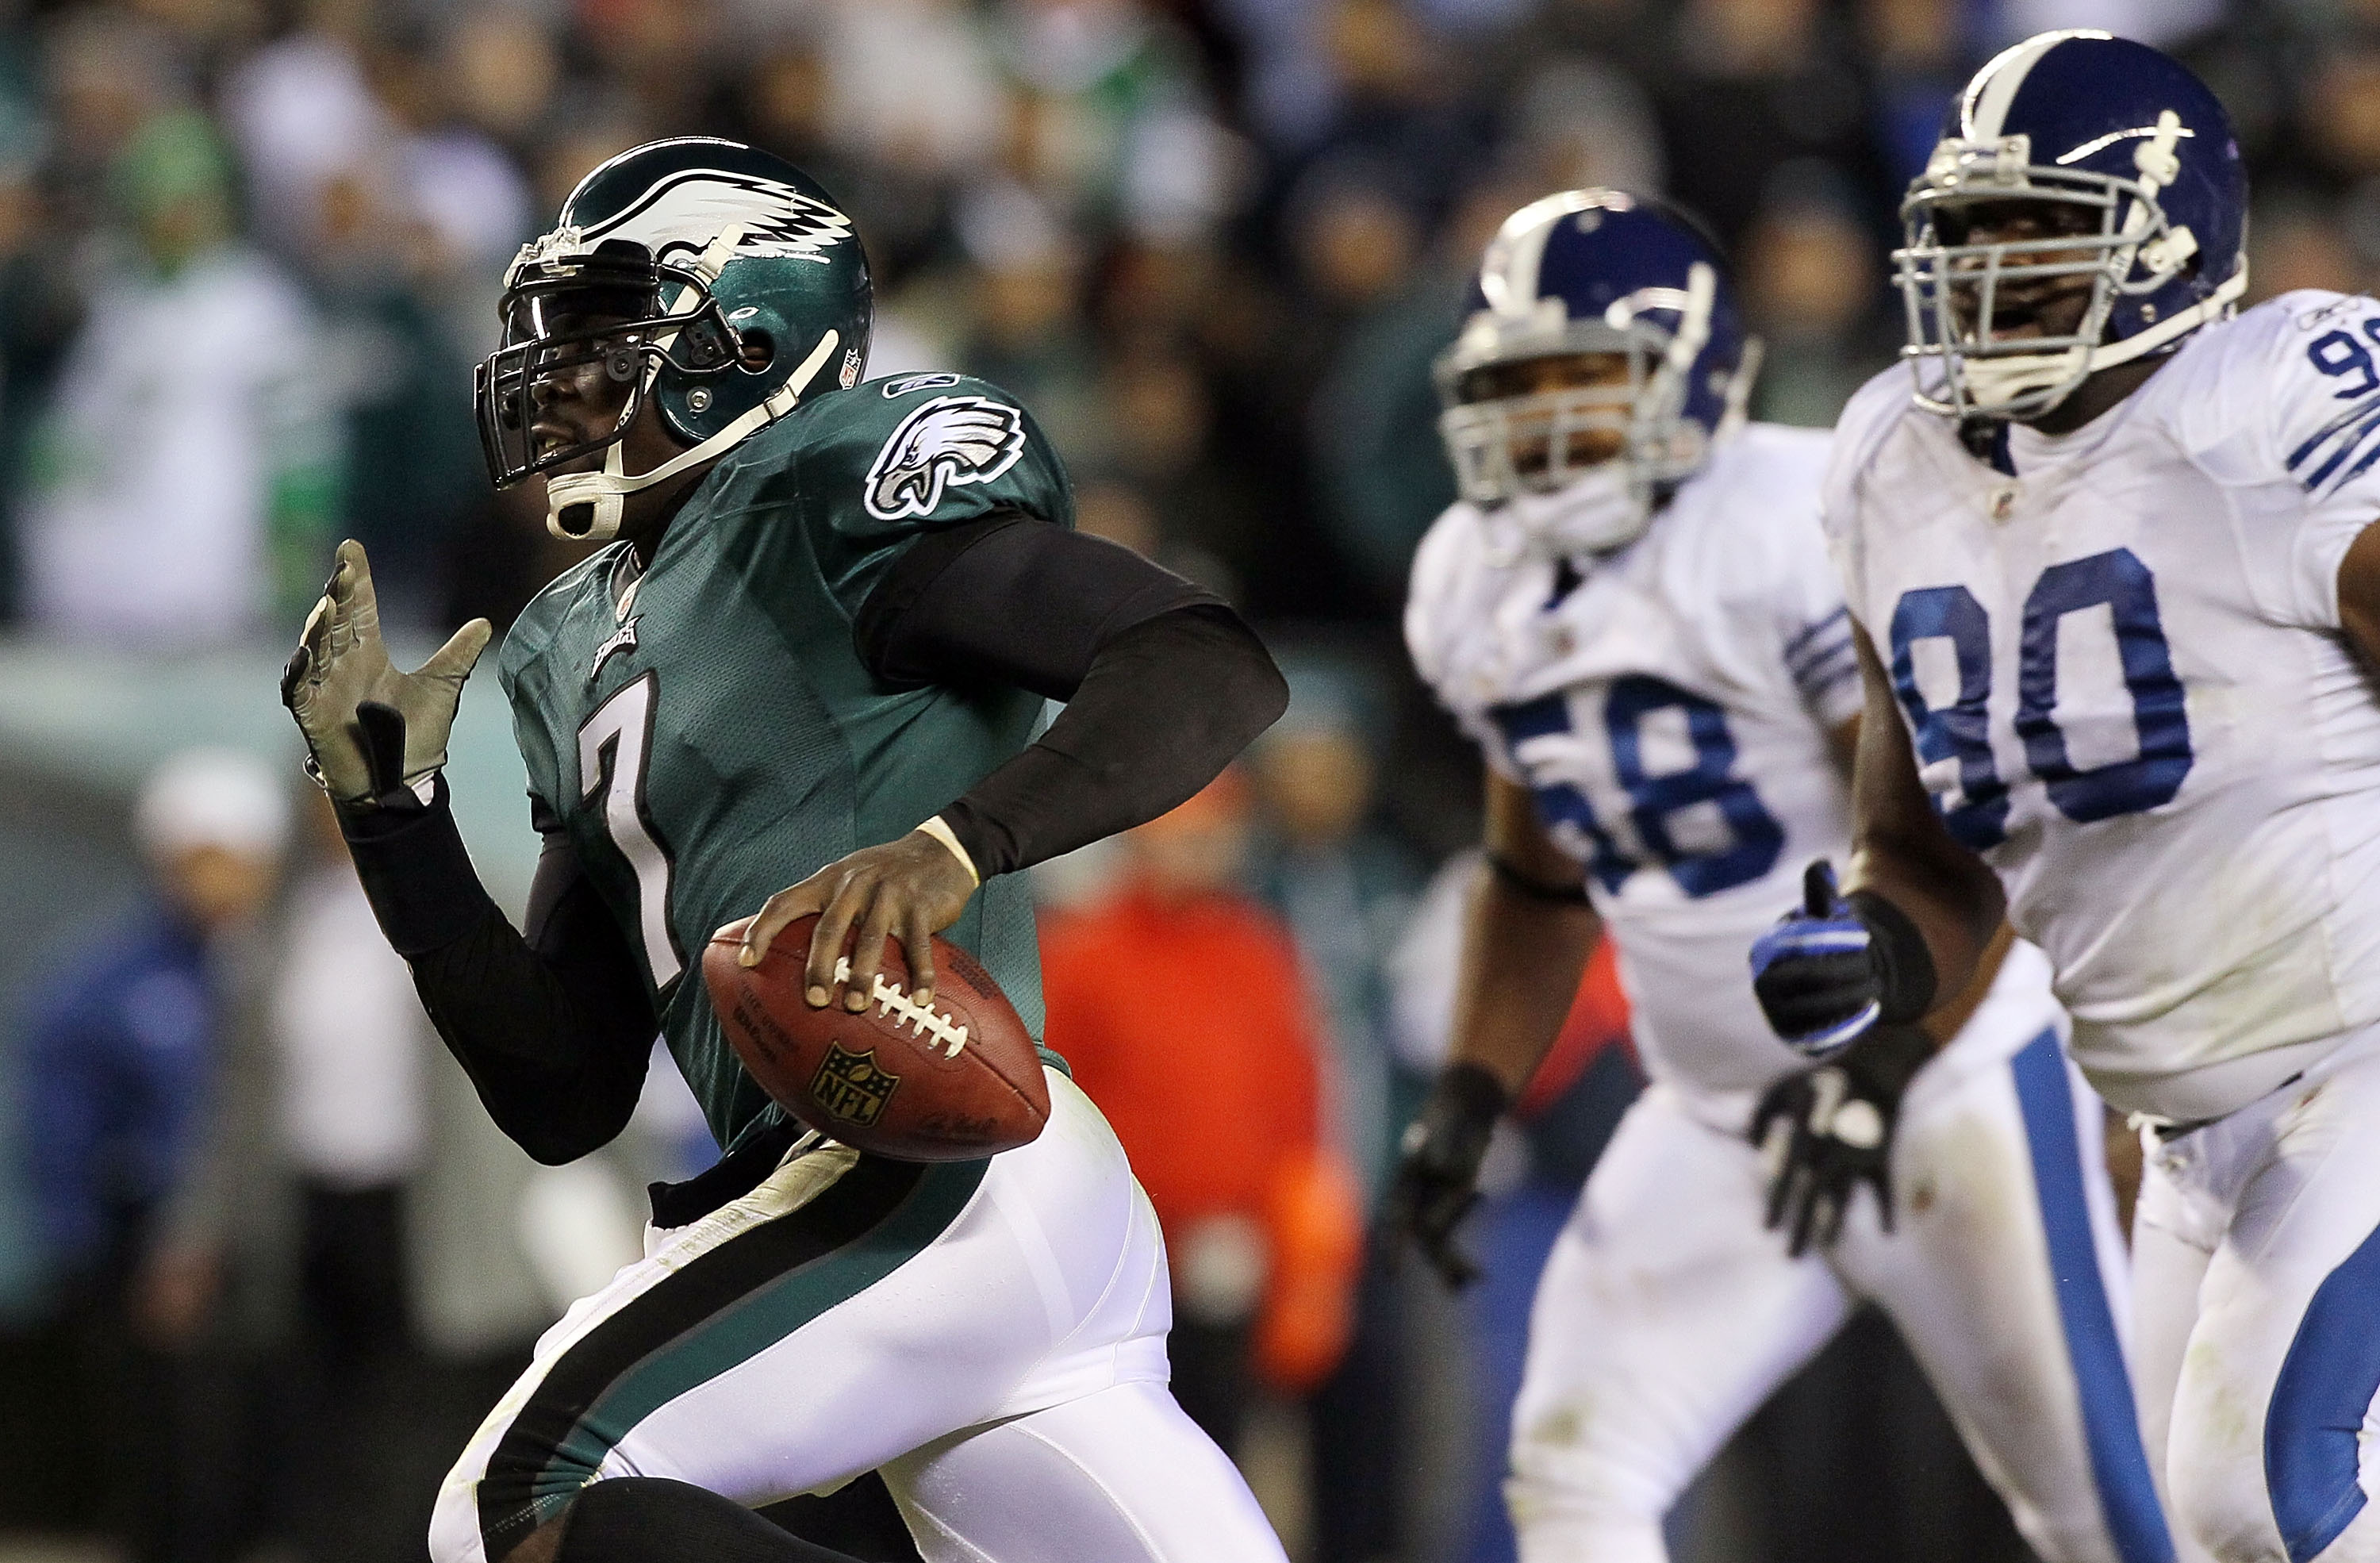 Michael Vick: If He Keeps This Up, Could He Make NFL Hall of Fame